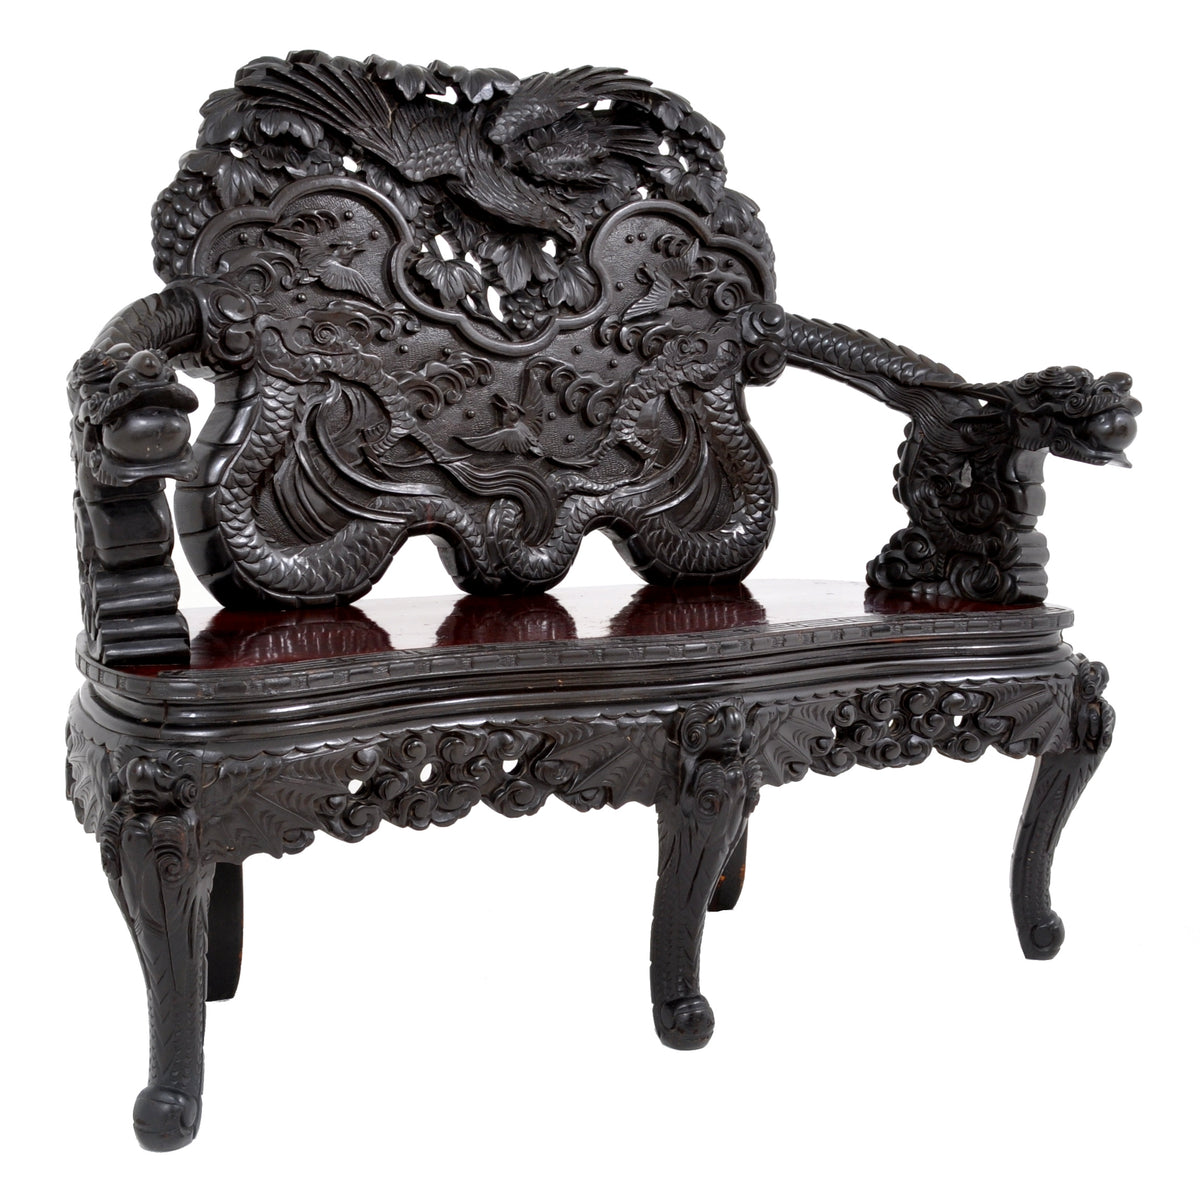 Antique Chinese Qing Dynasty Carved Rosewood Dragon Loveseat / Sofa / Bench, Circa 1890